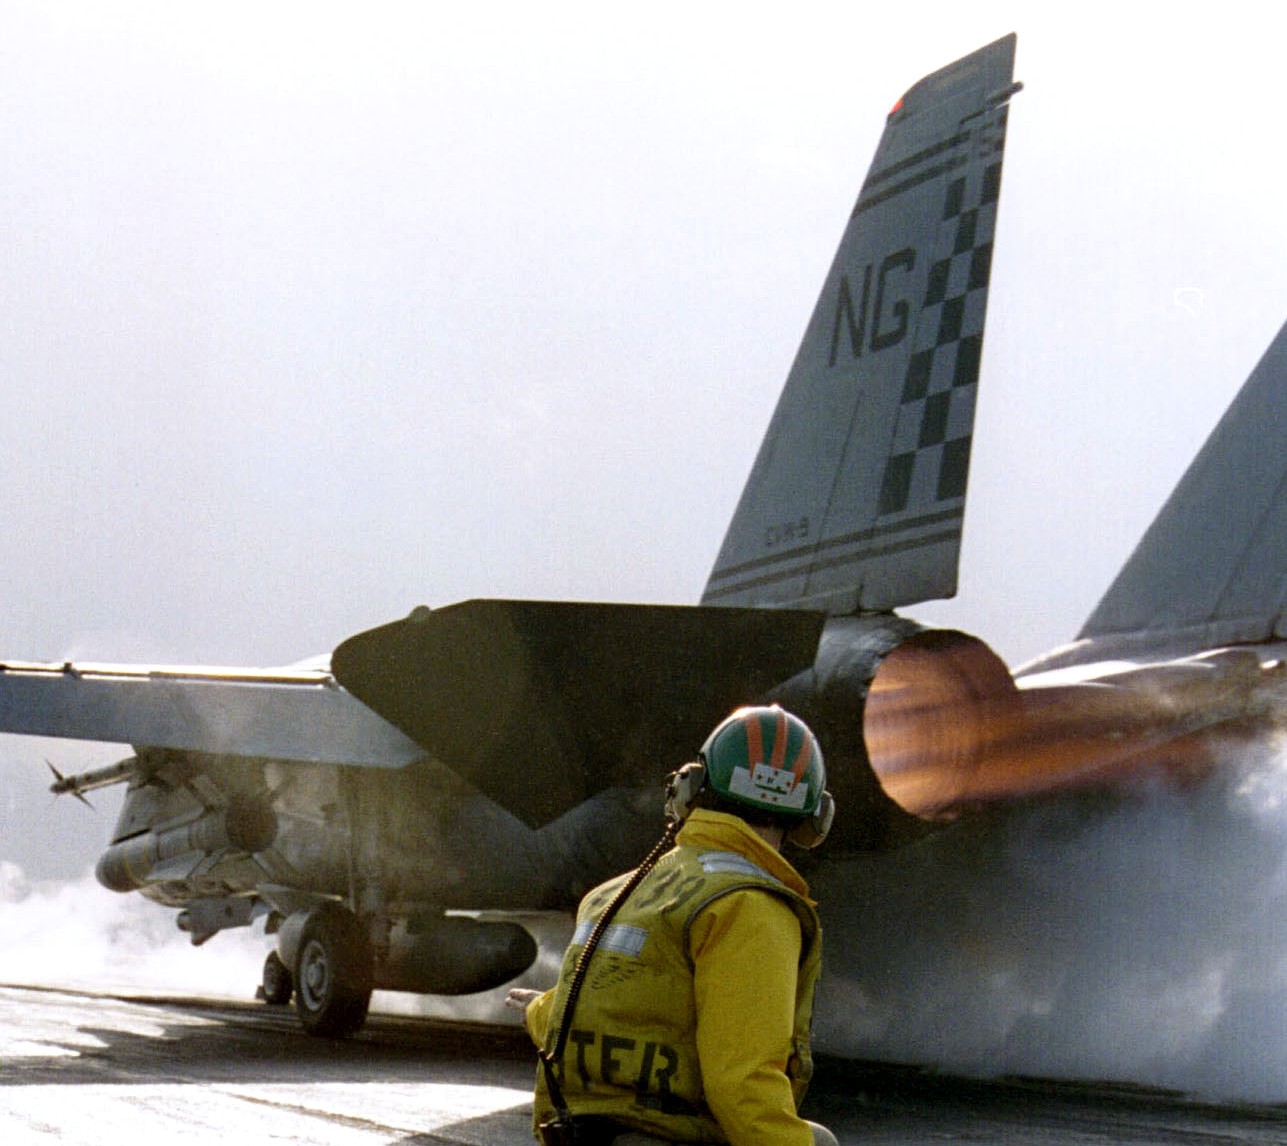 vf-211 fighting checkmates fighter squadron f-14a tomcat us navy carrier air wing cvw-9 uss nimitz cvn-68 34